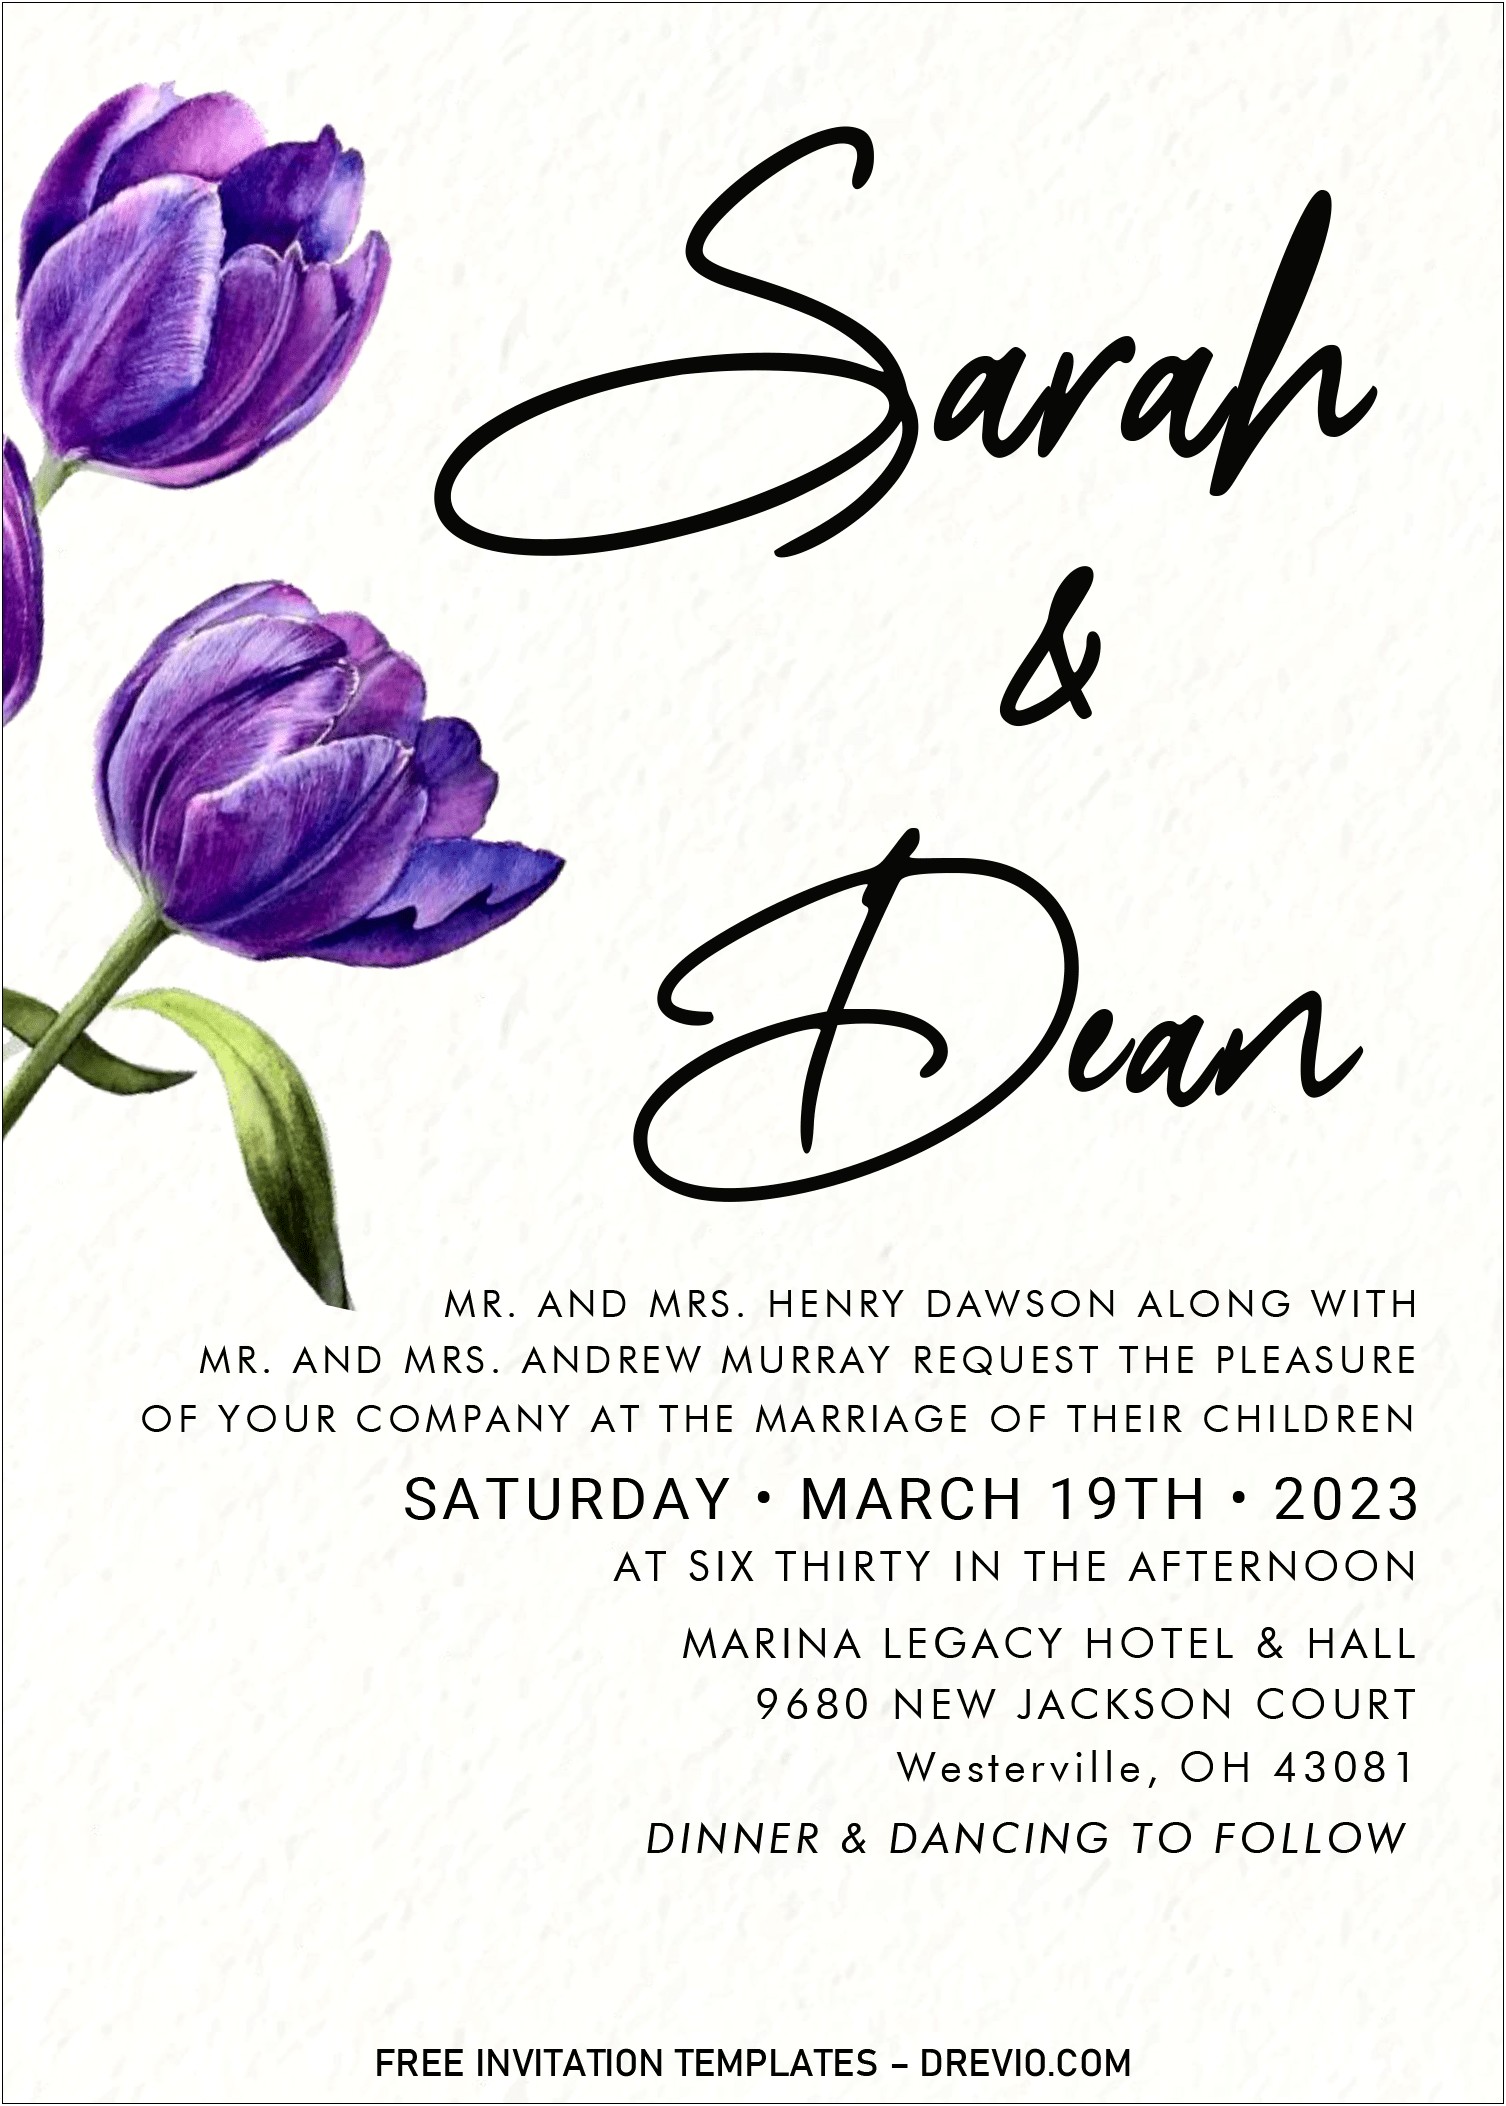 Create Your Own Wedding Invitations Free Printable